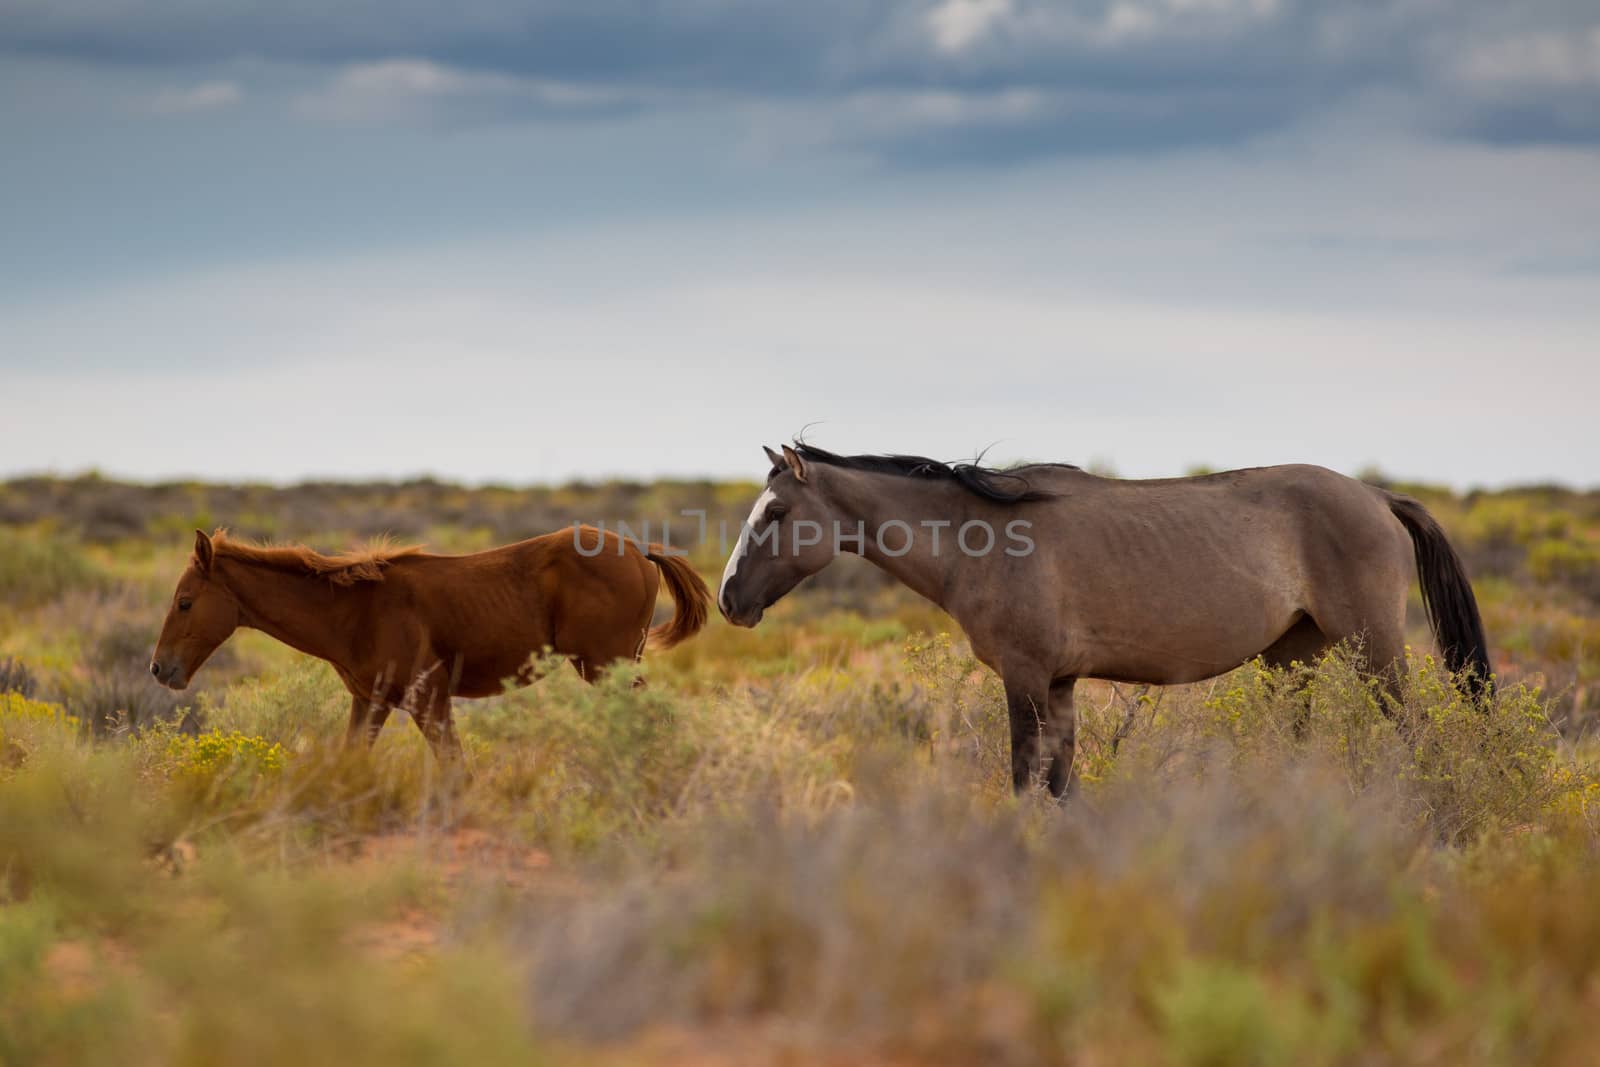 Wild Horses In Utah close by the Monument Valley, within the Navajo Indians Reserve